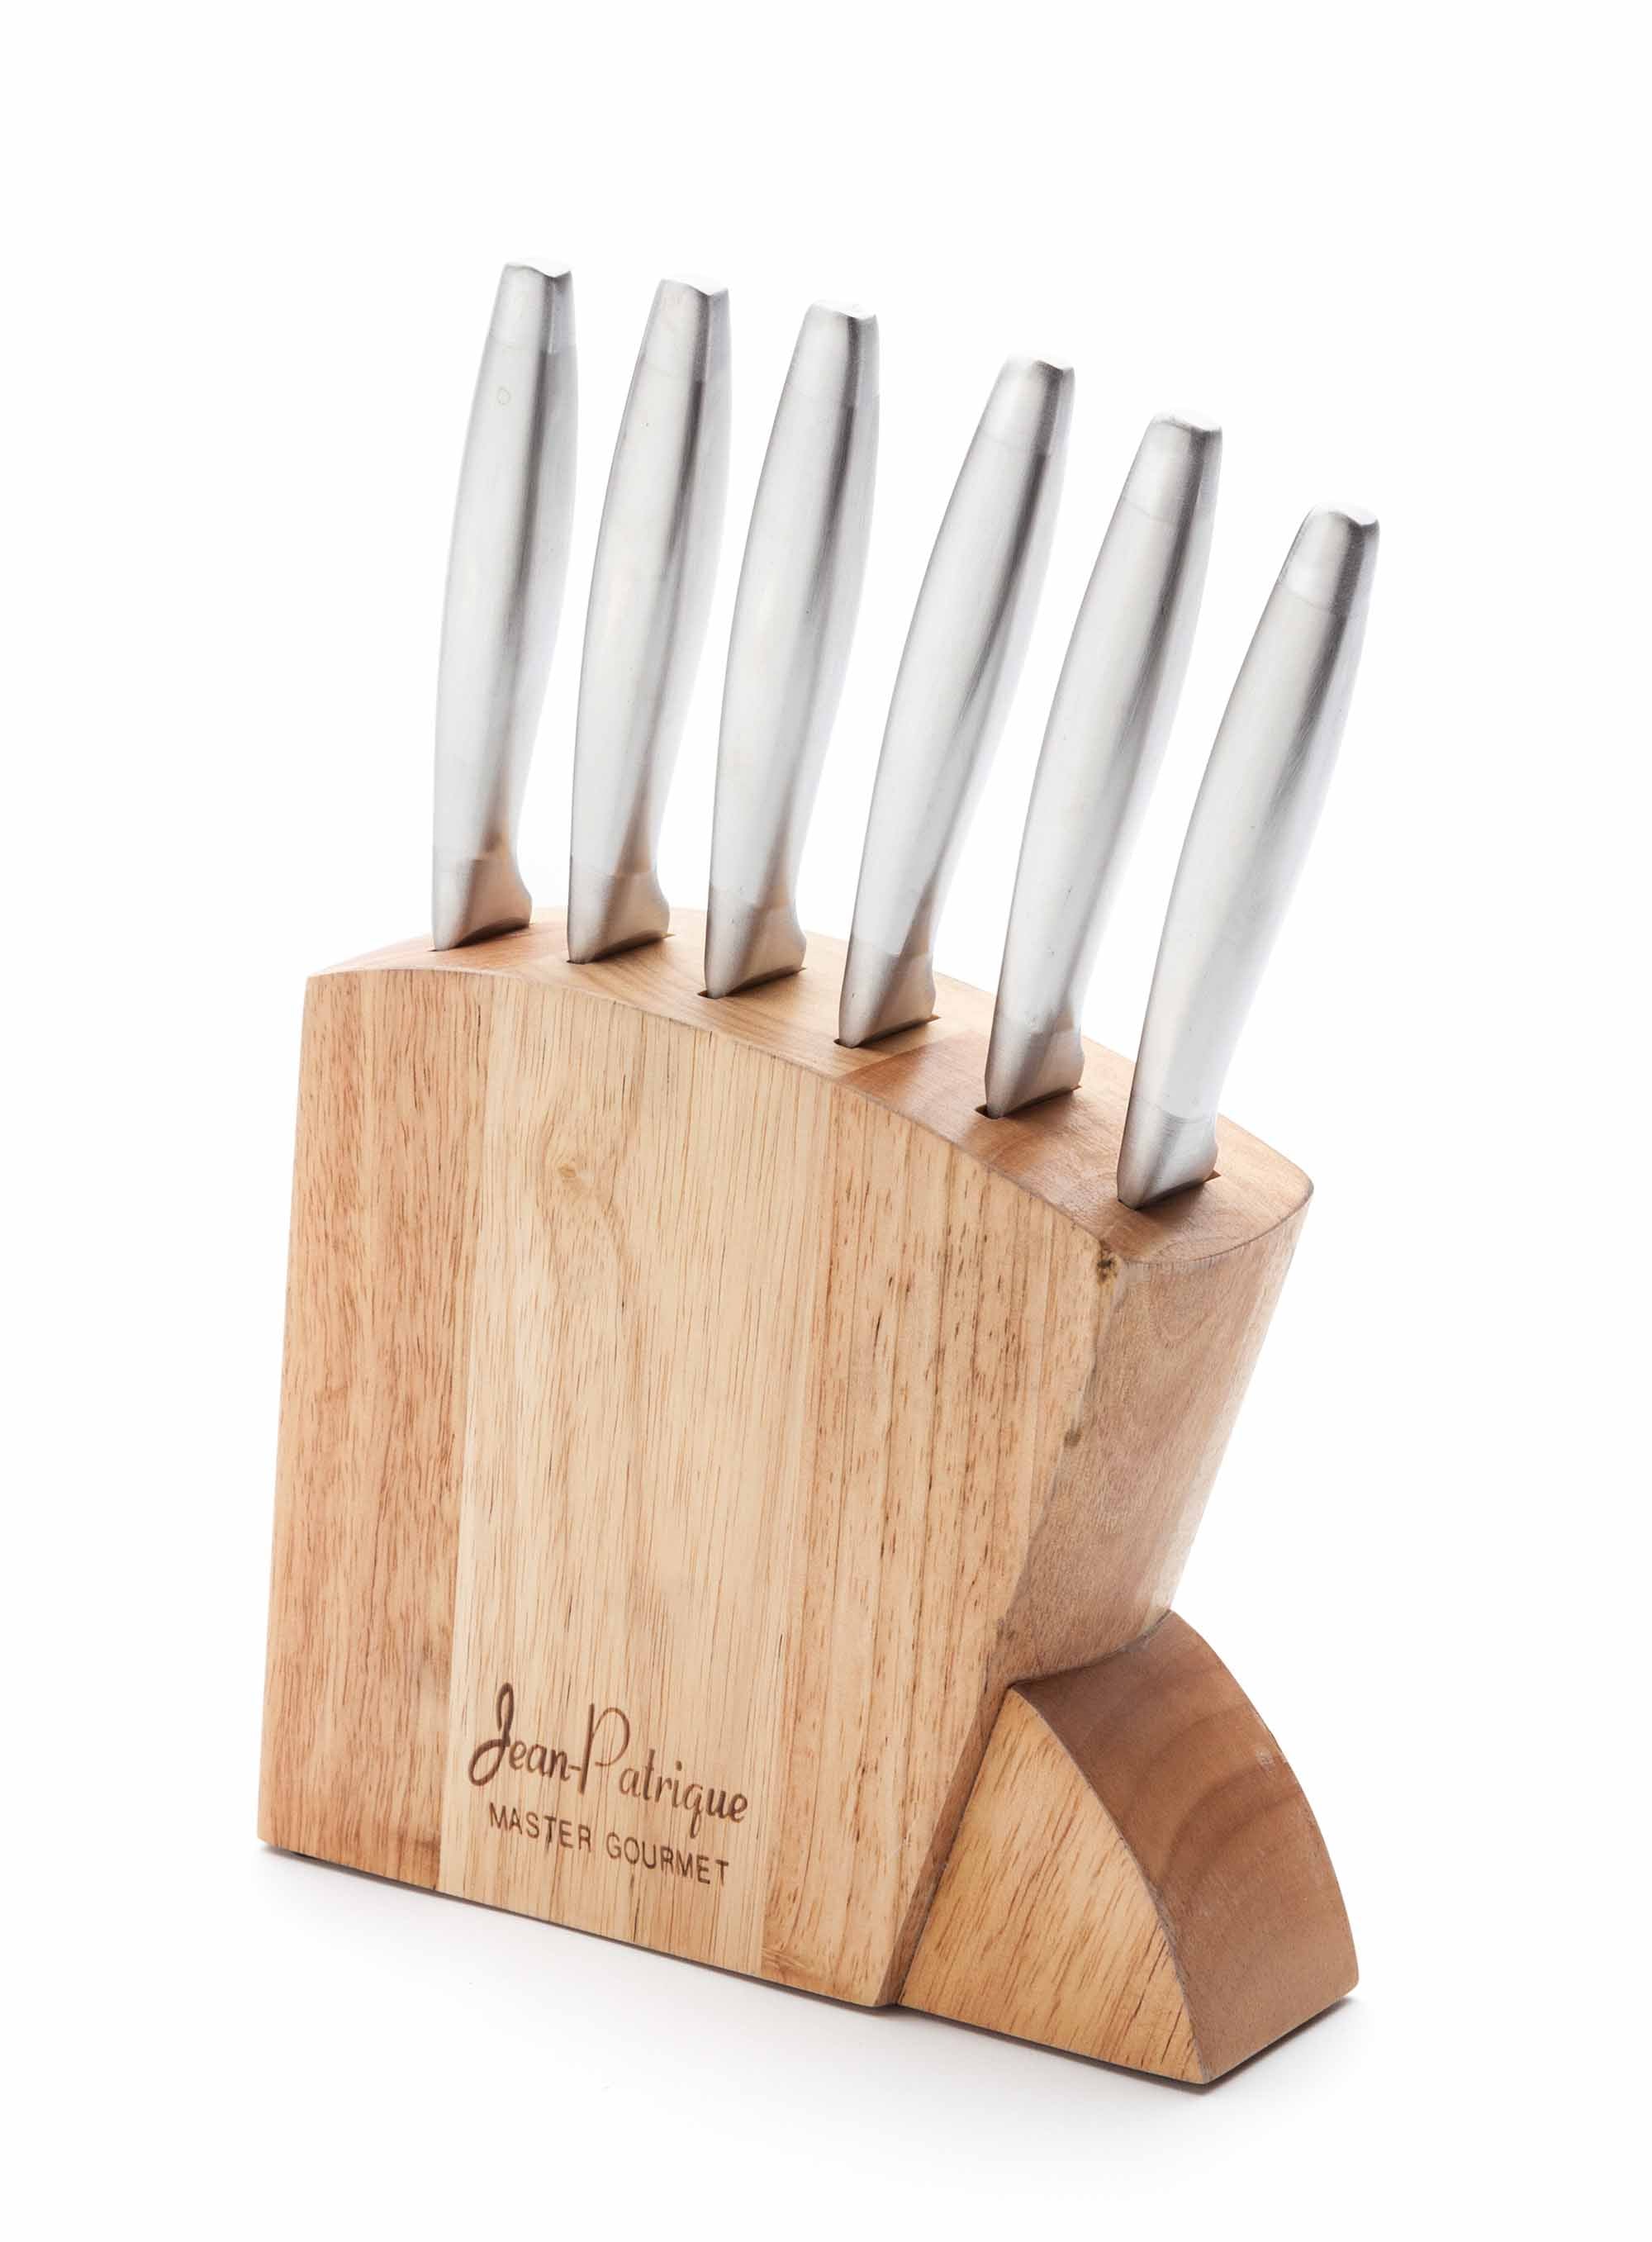 Jean Patrique Chopaholic 3 Piece Chef's Knife Set with Professional Bamboo Knife Block and Chopping Board, Stainless Steel